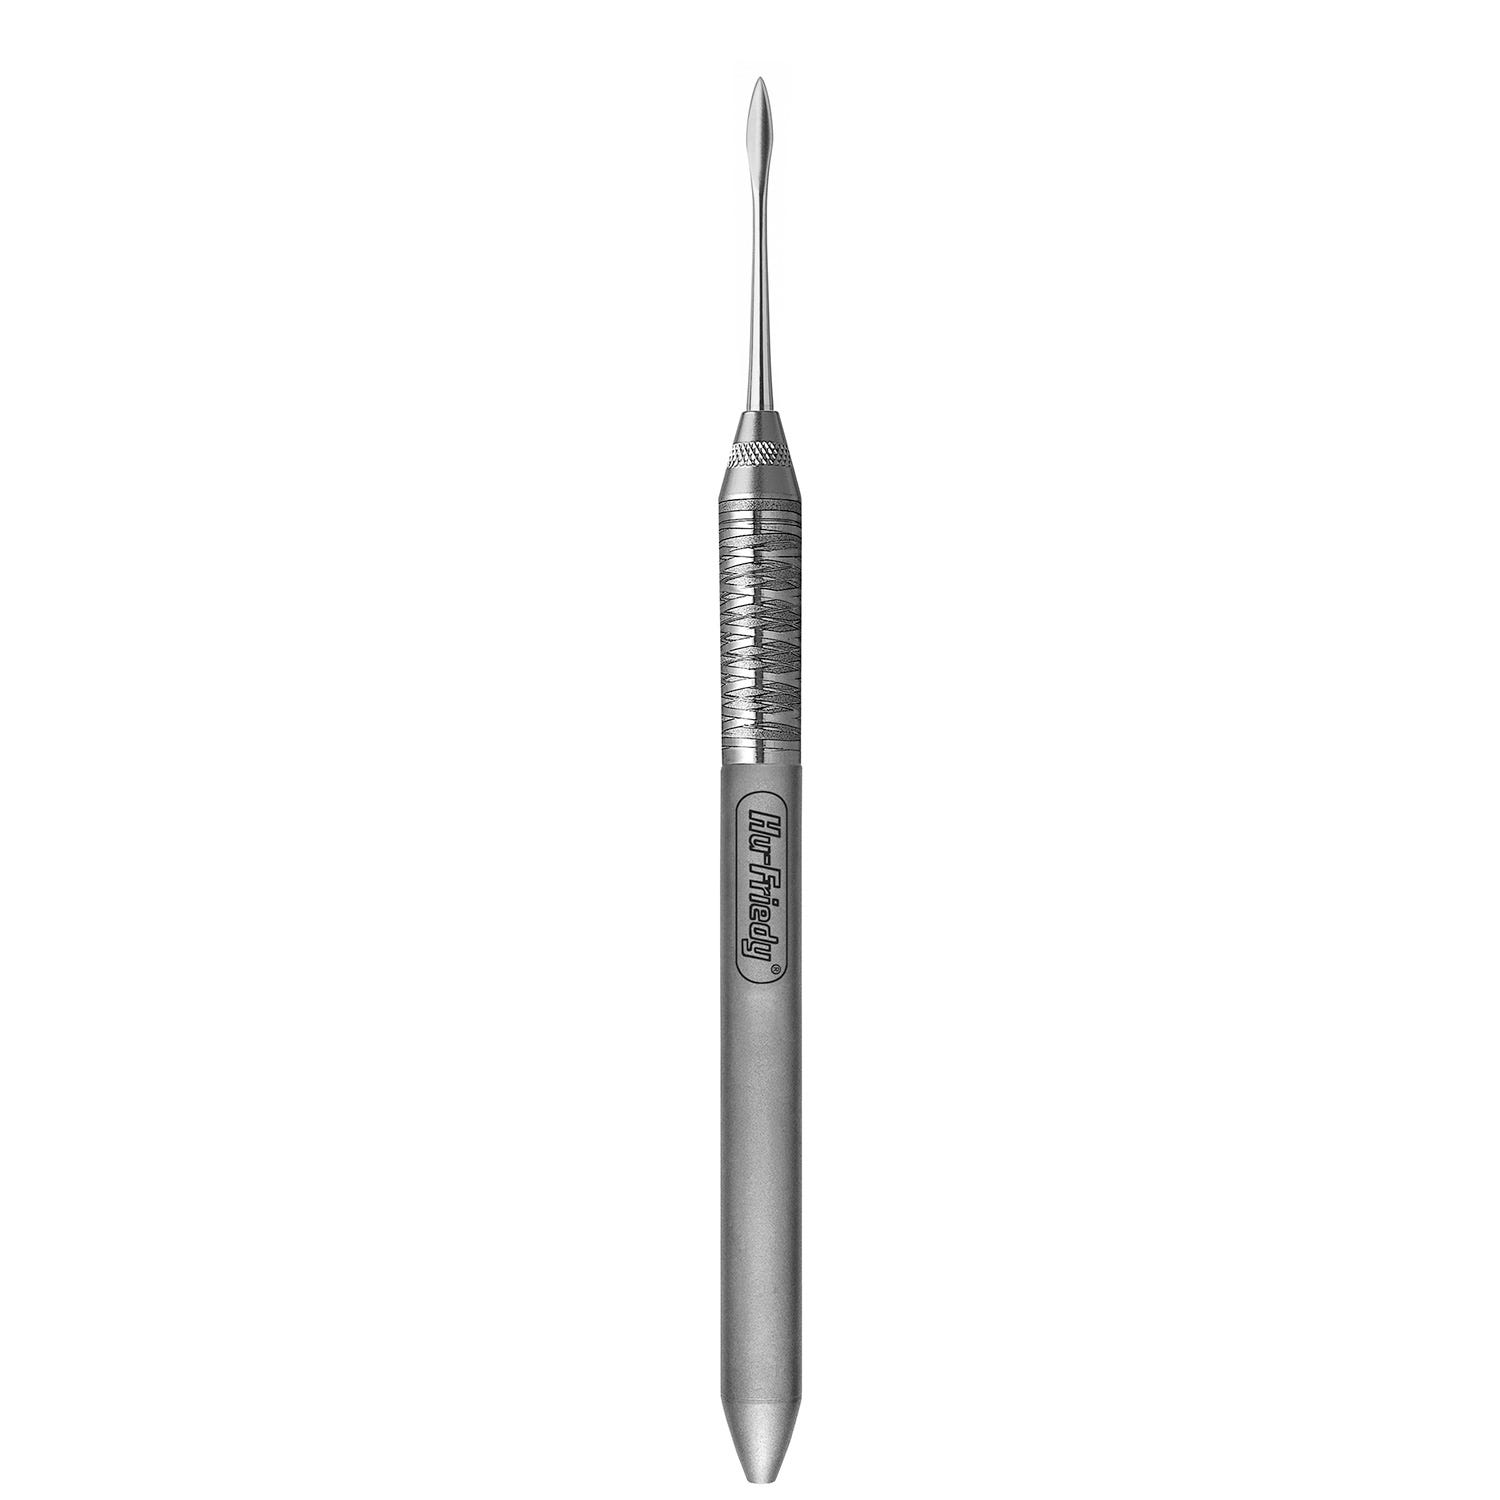 Periotome Anterior #6 Satin Steel Handle Single End, Straight